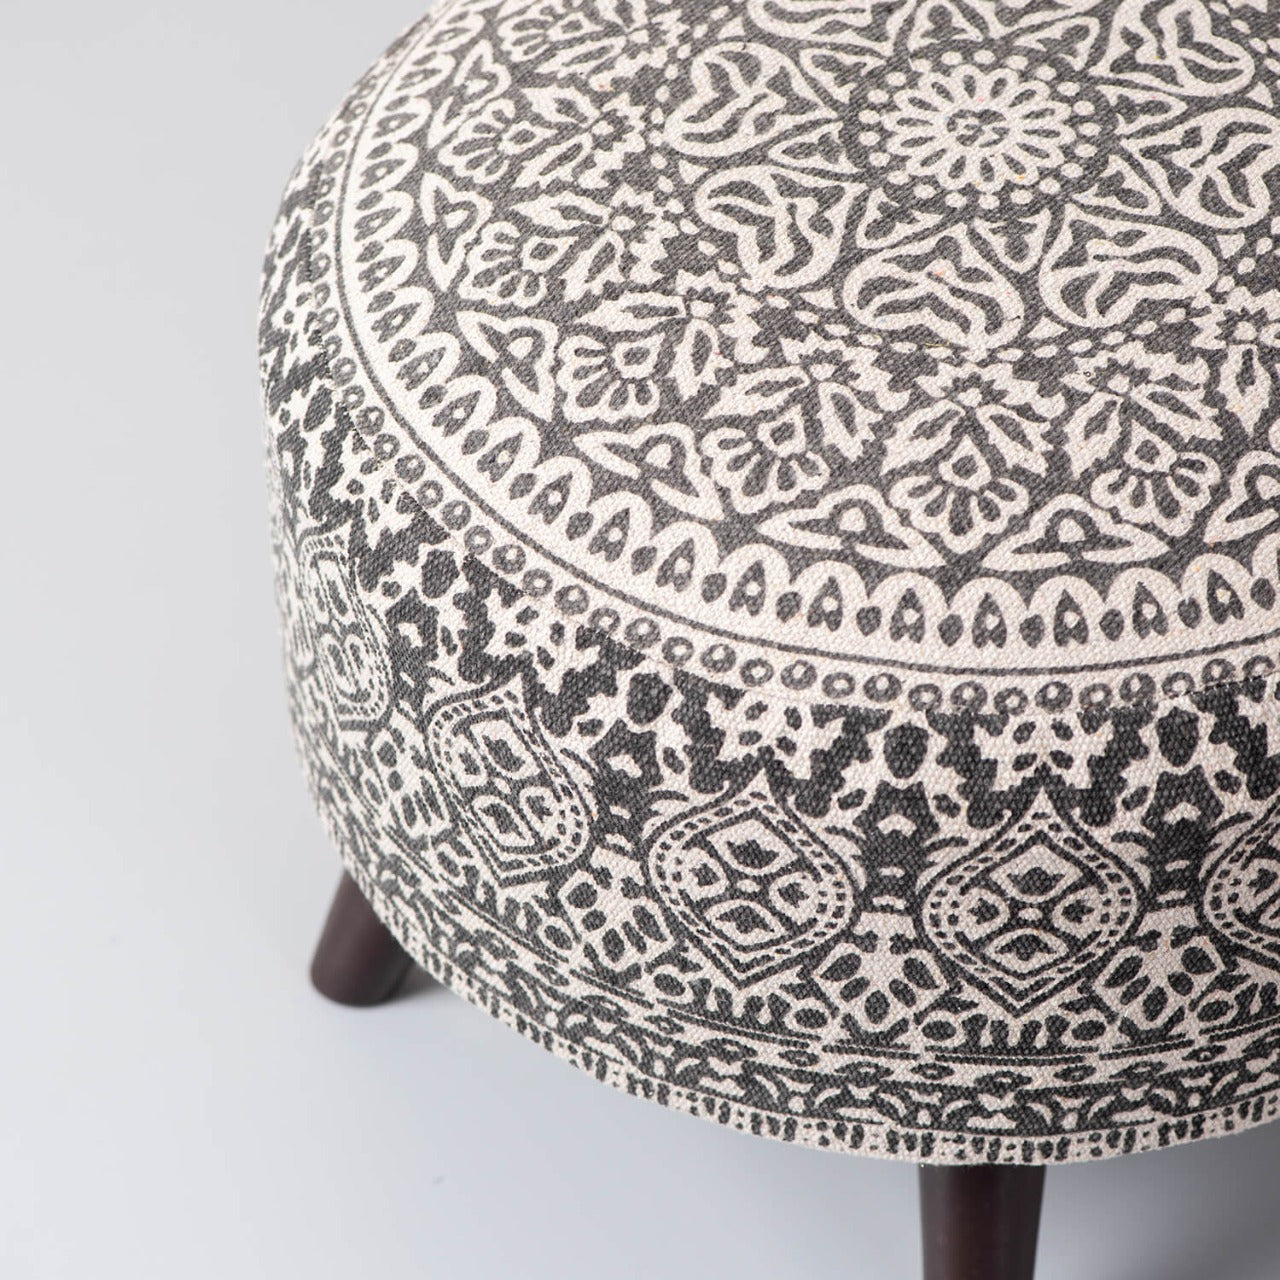 Wooden Ottomans: Classic Imprinted Ottoman